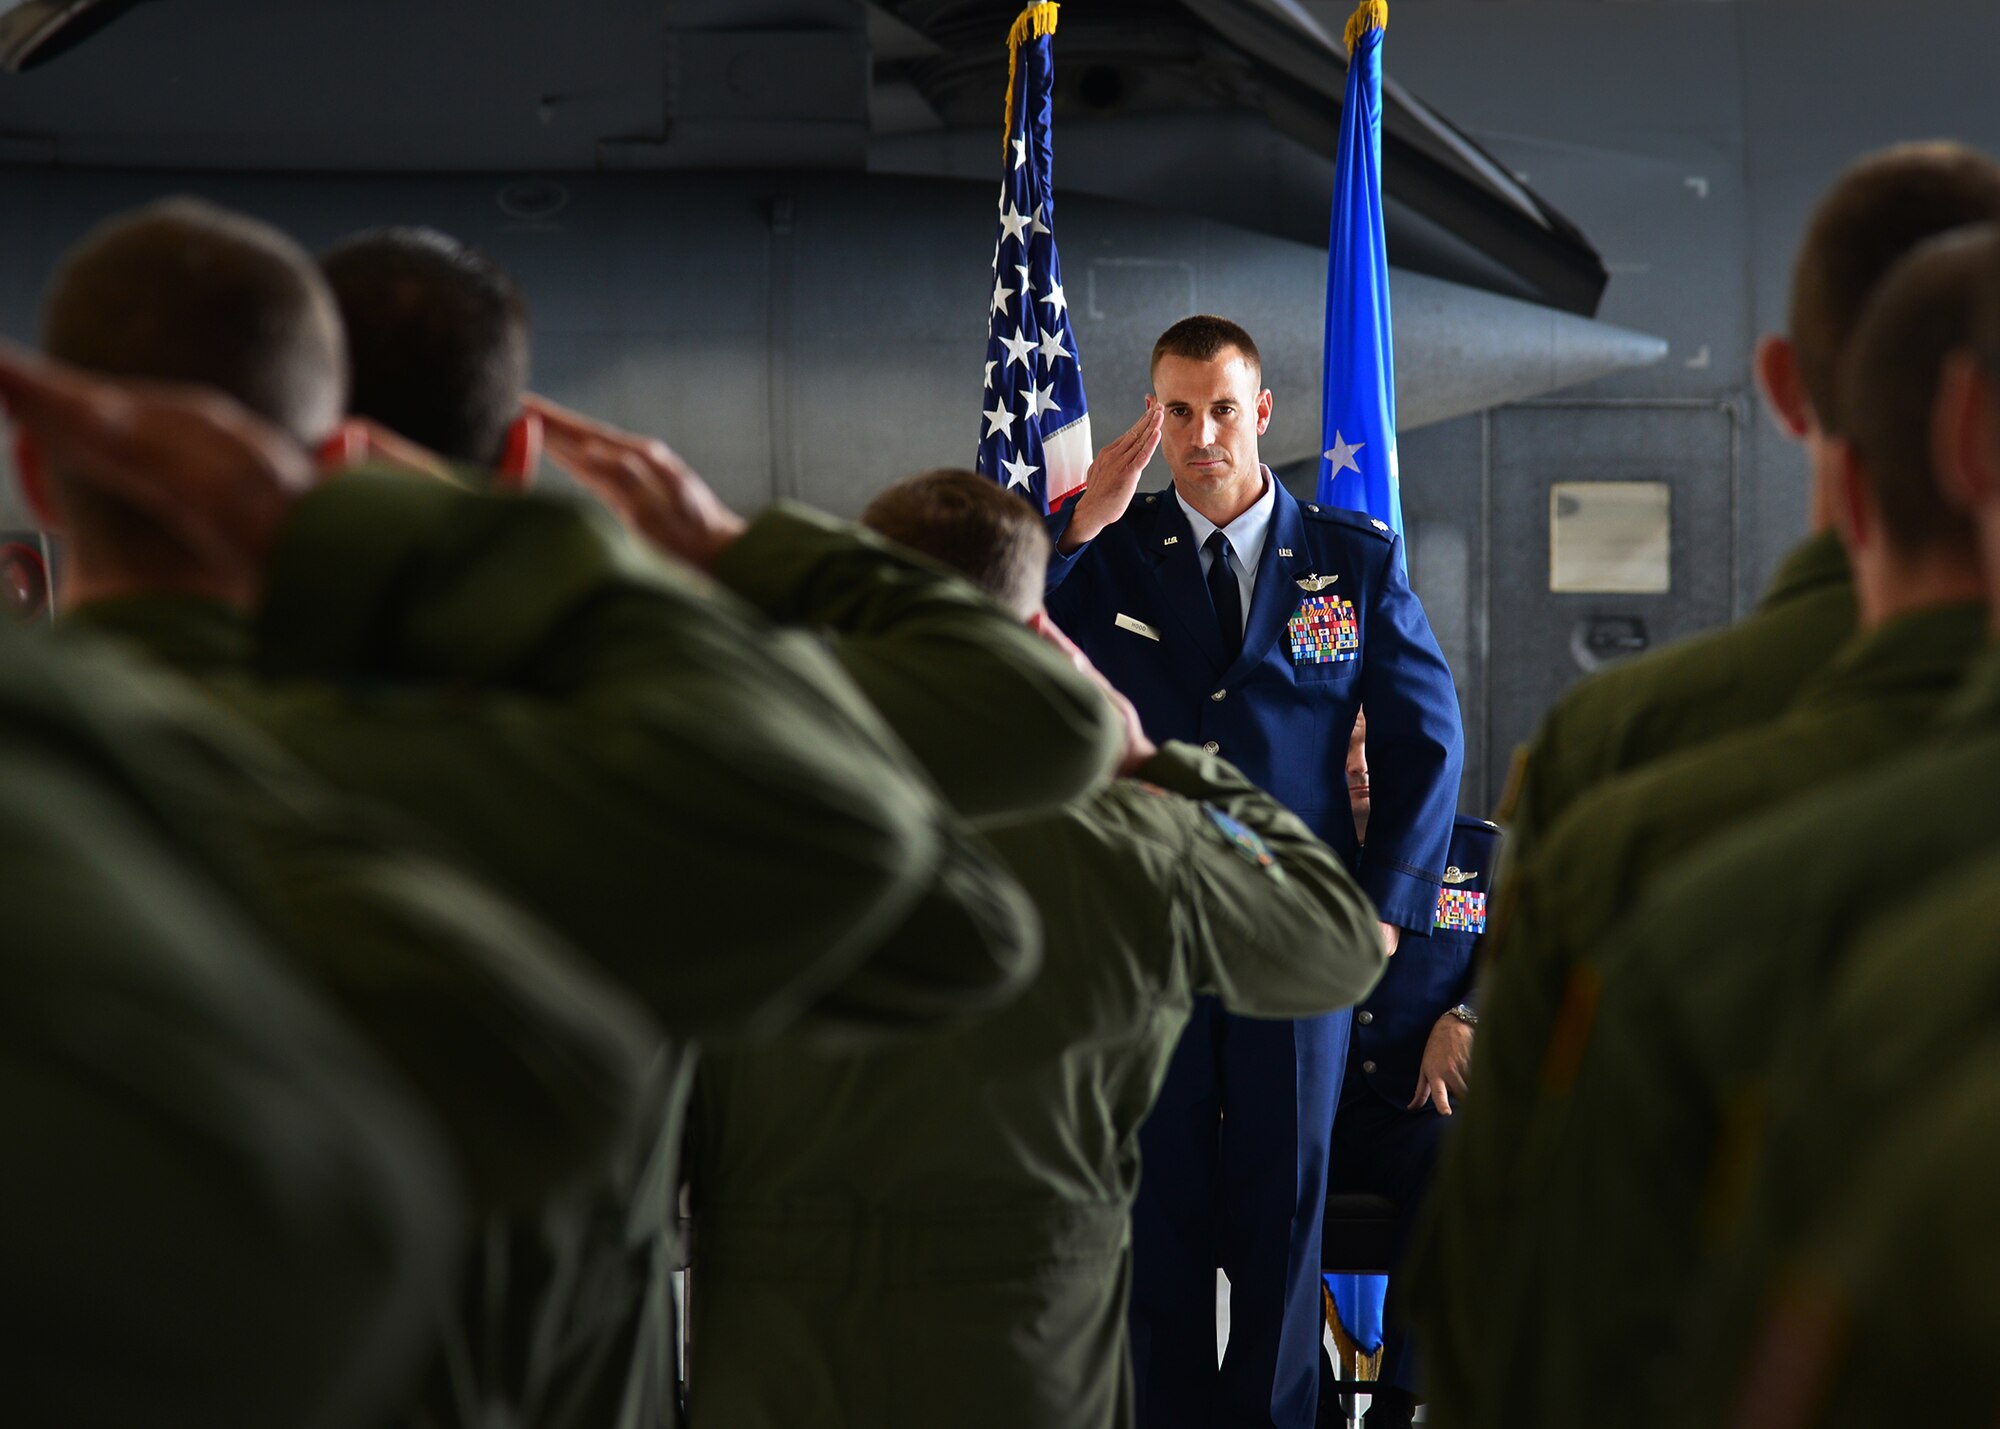 U. S. Air Force Lt. Col. Timothy Hood, 16th Special Operations Squadron commander, receives his first salute as commander during the 73rd Special Operations Squadron re-designation ceremony and 16th SOS change of command ceremony June 12, 2015 at Cannon Air Force Base, N.M. The 16th SOS absorbed aircraft and personnel from the 73rd SOS, simultaneously inheriting a long and proud heritage from the 16th SOS. (U. S. Air Force photo/Senior Airman Chip Slack)